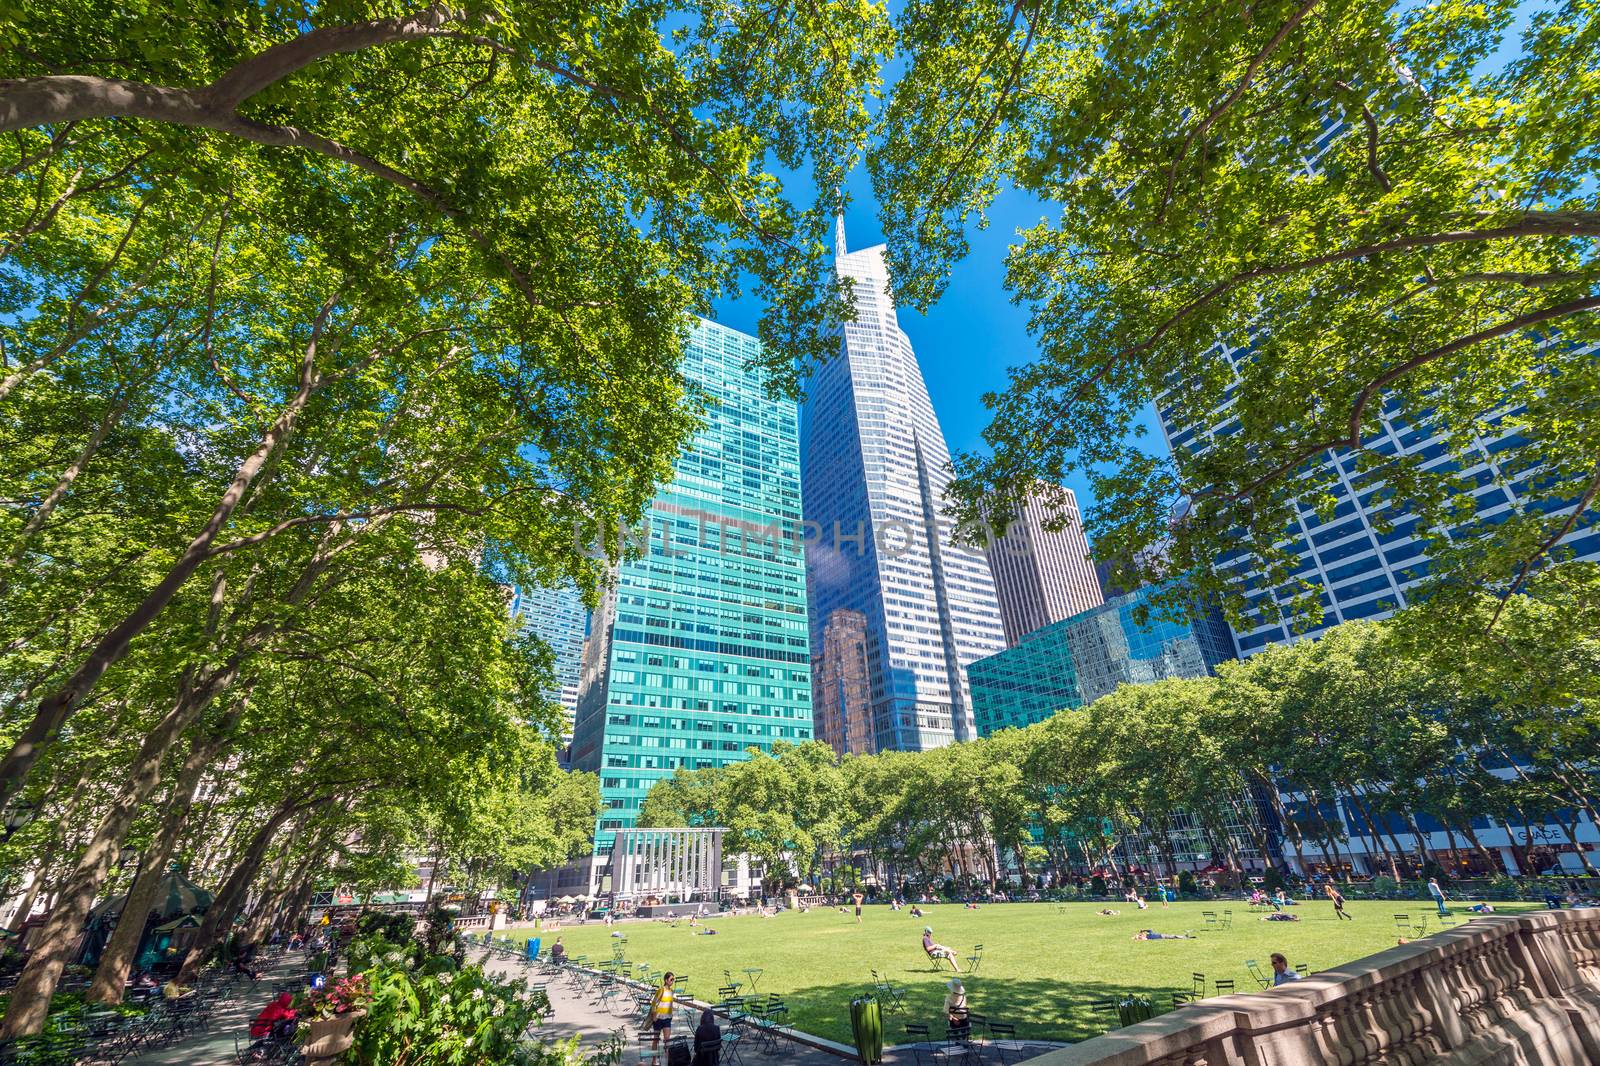 NEW YORK CITY - MAY 24, 2013: Tourists in Bryant Park. New York is visited by more than 50 million people every year.